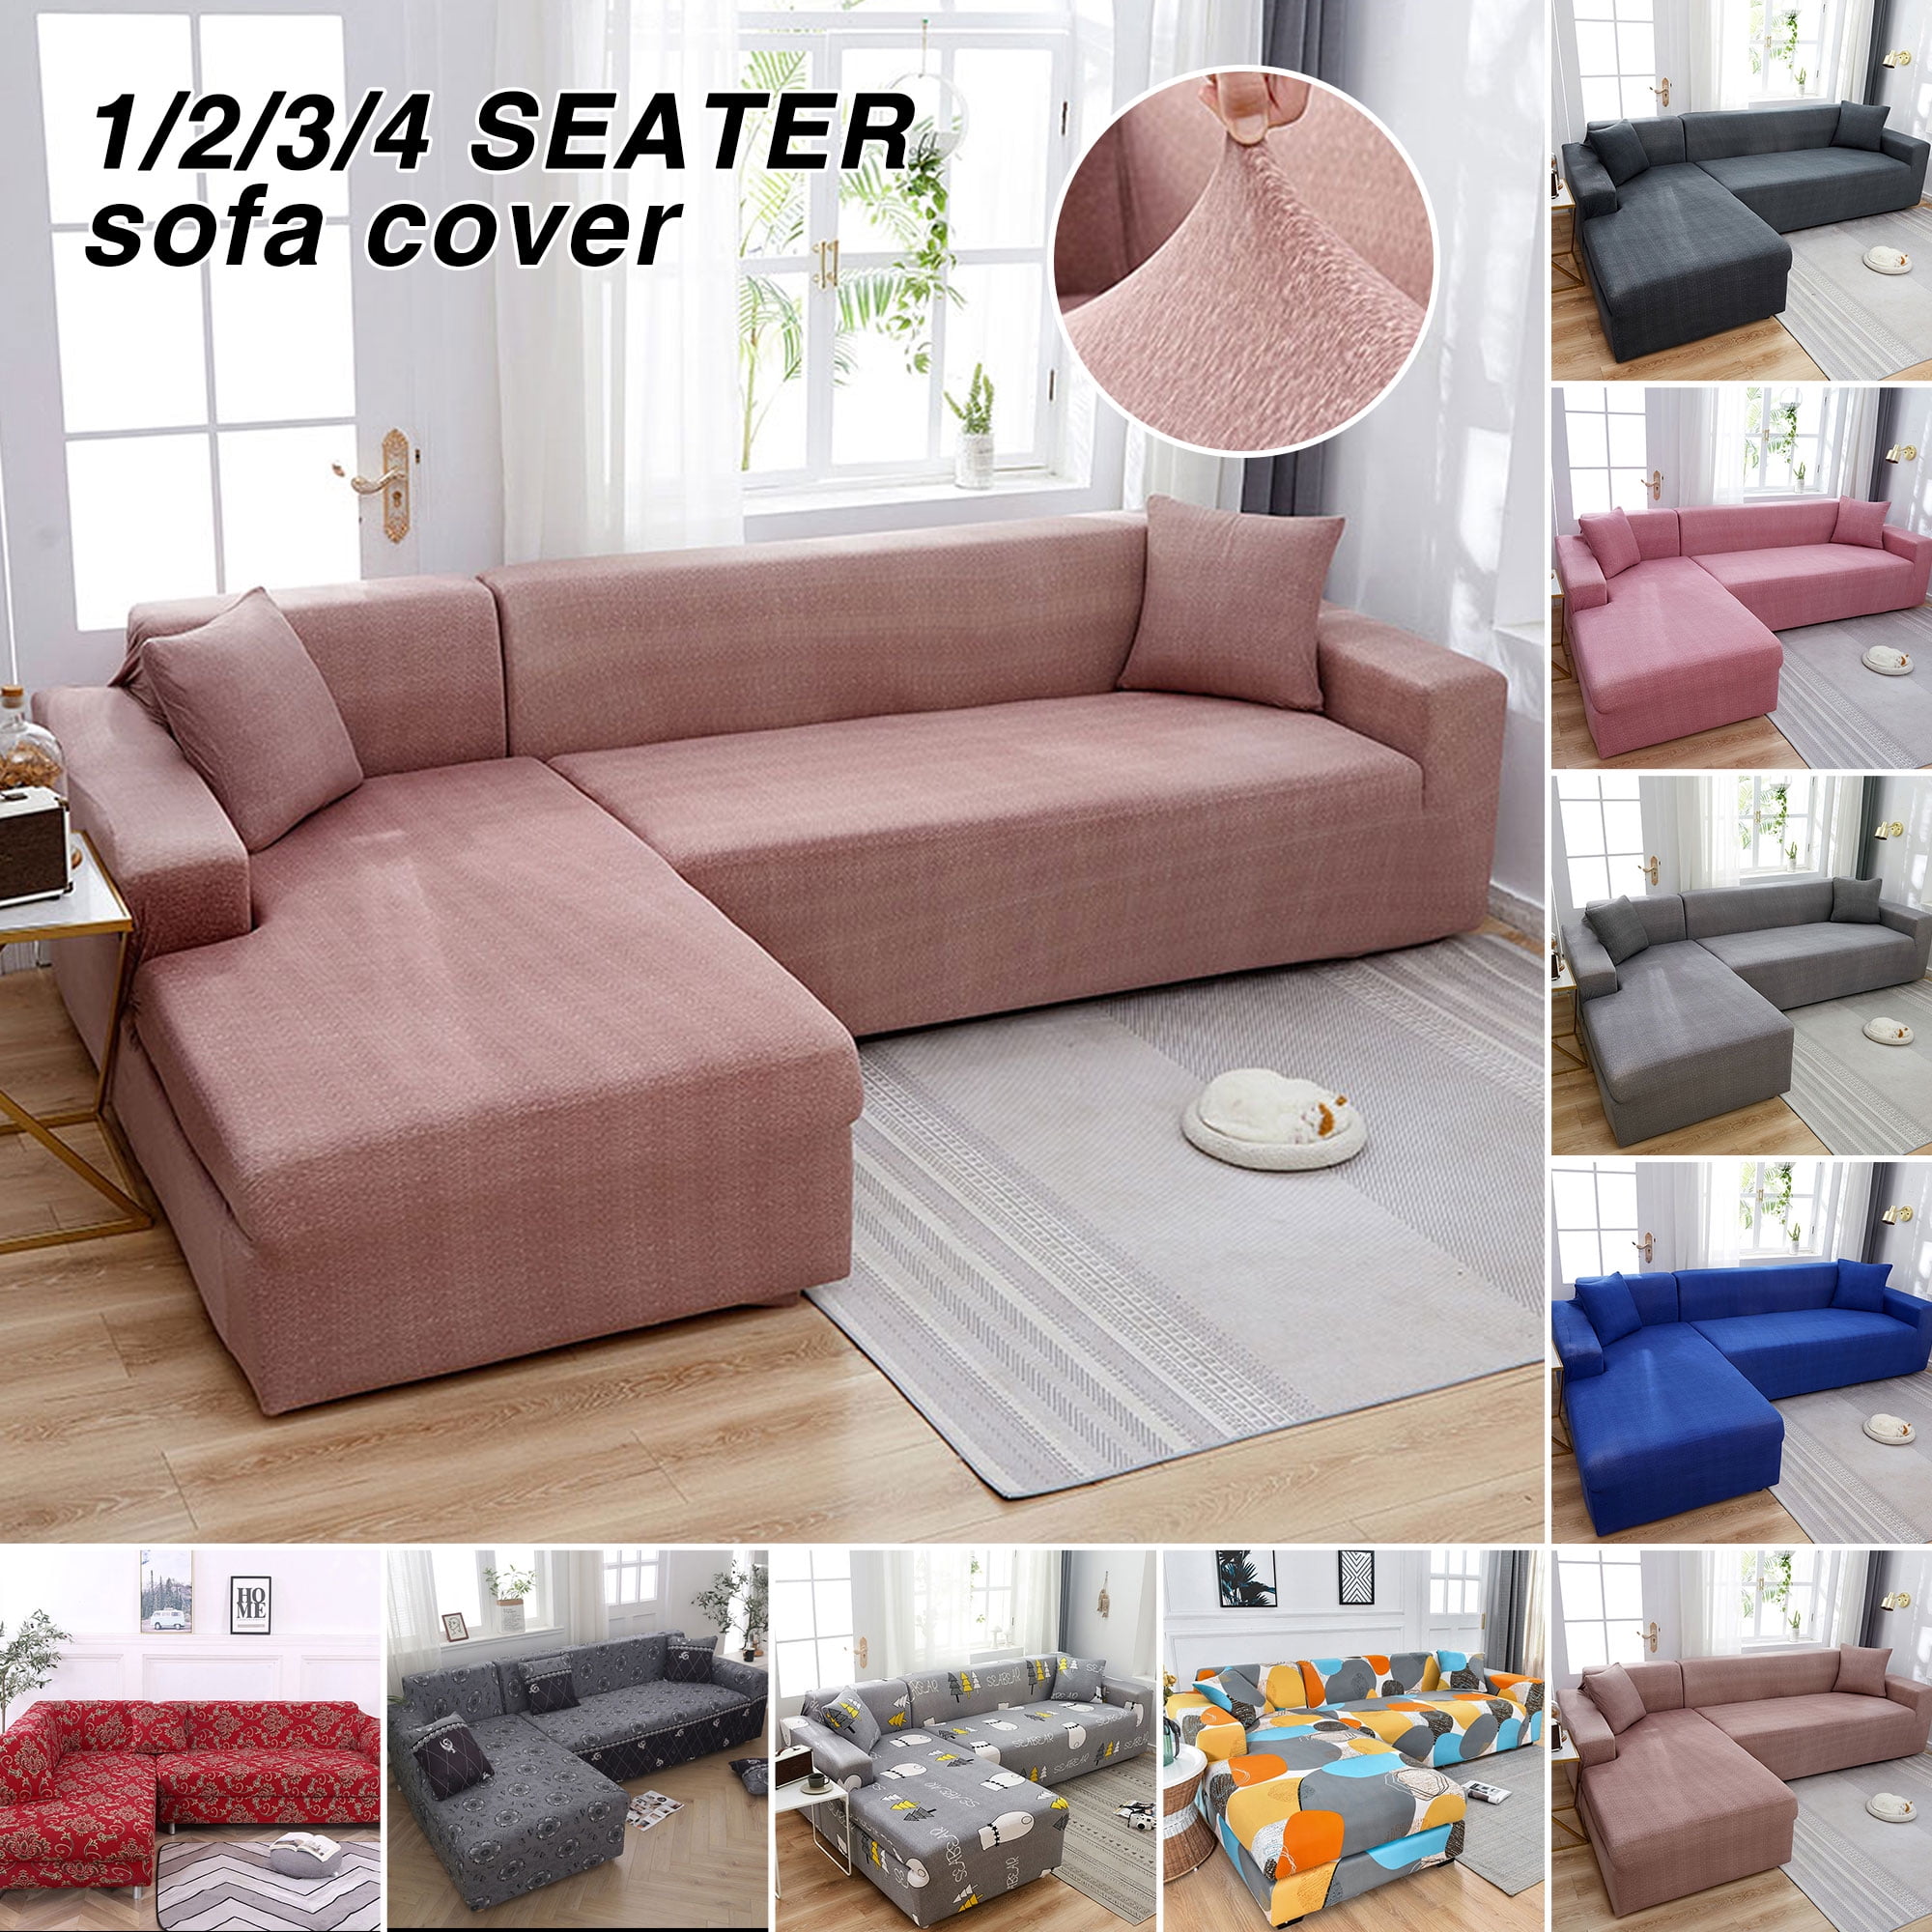 Details about   1/2/3/4 Seater Sofa Seat Covers Couch Slipcover Cushion Elastic Settee Protector 